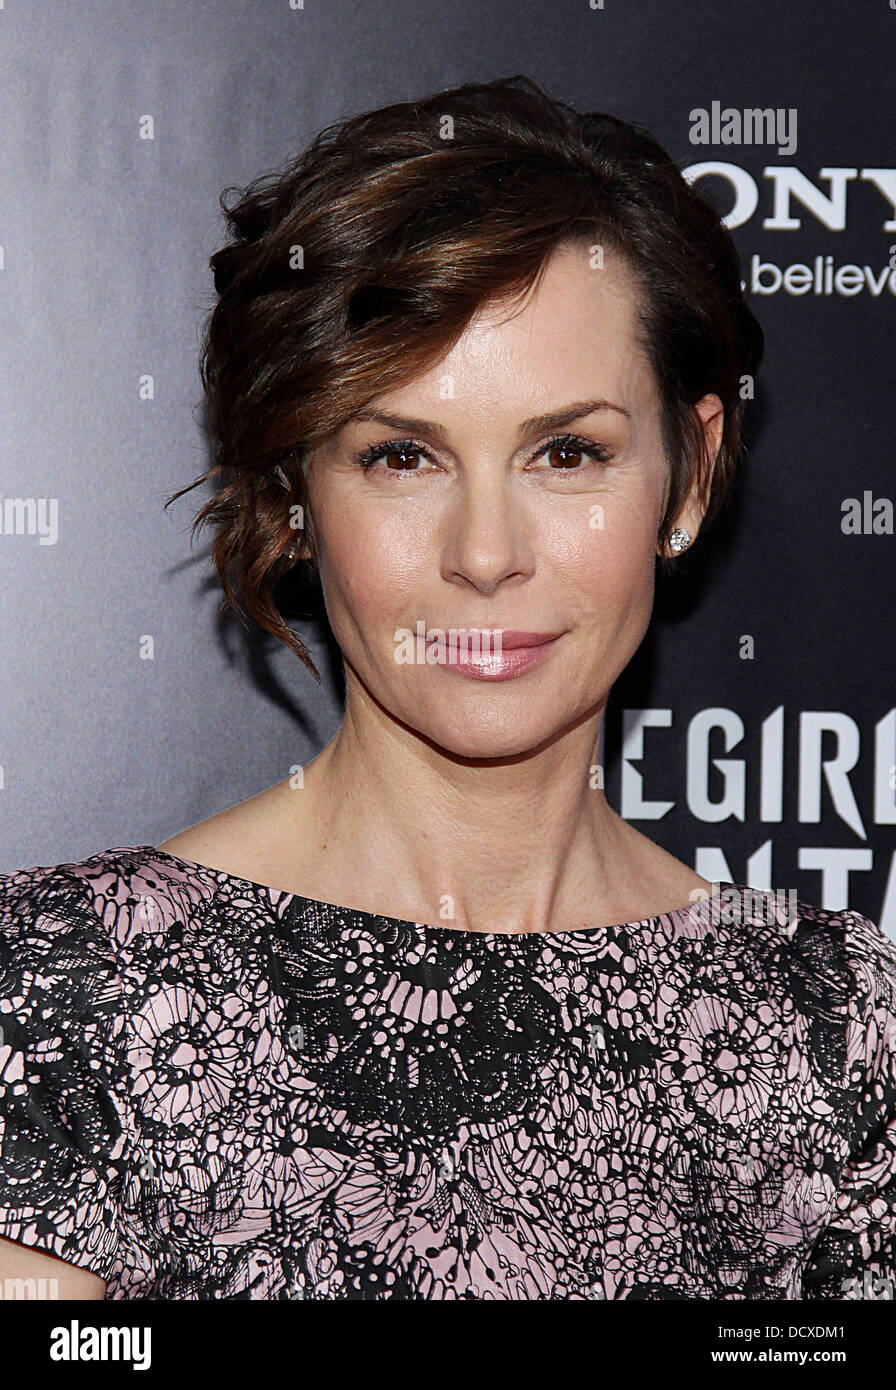 Embeth Davidtz 'The Girl With The Dragon Tattoo' New York Premiere - Arrivals New York City, USA - 14.12.11 Stock Photo